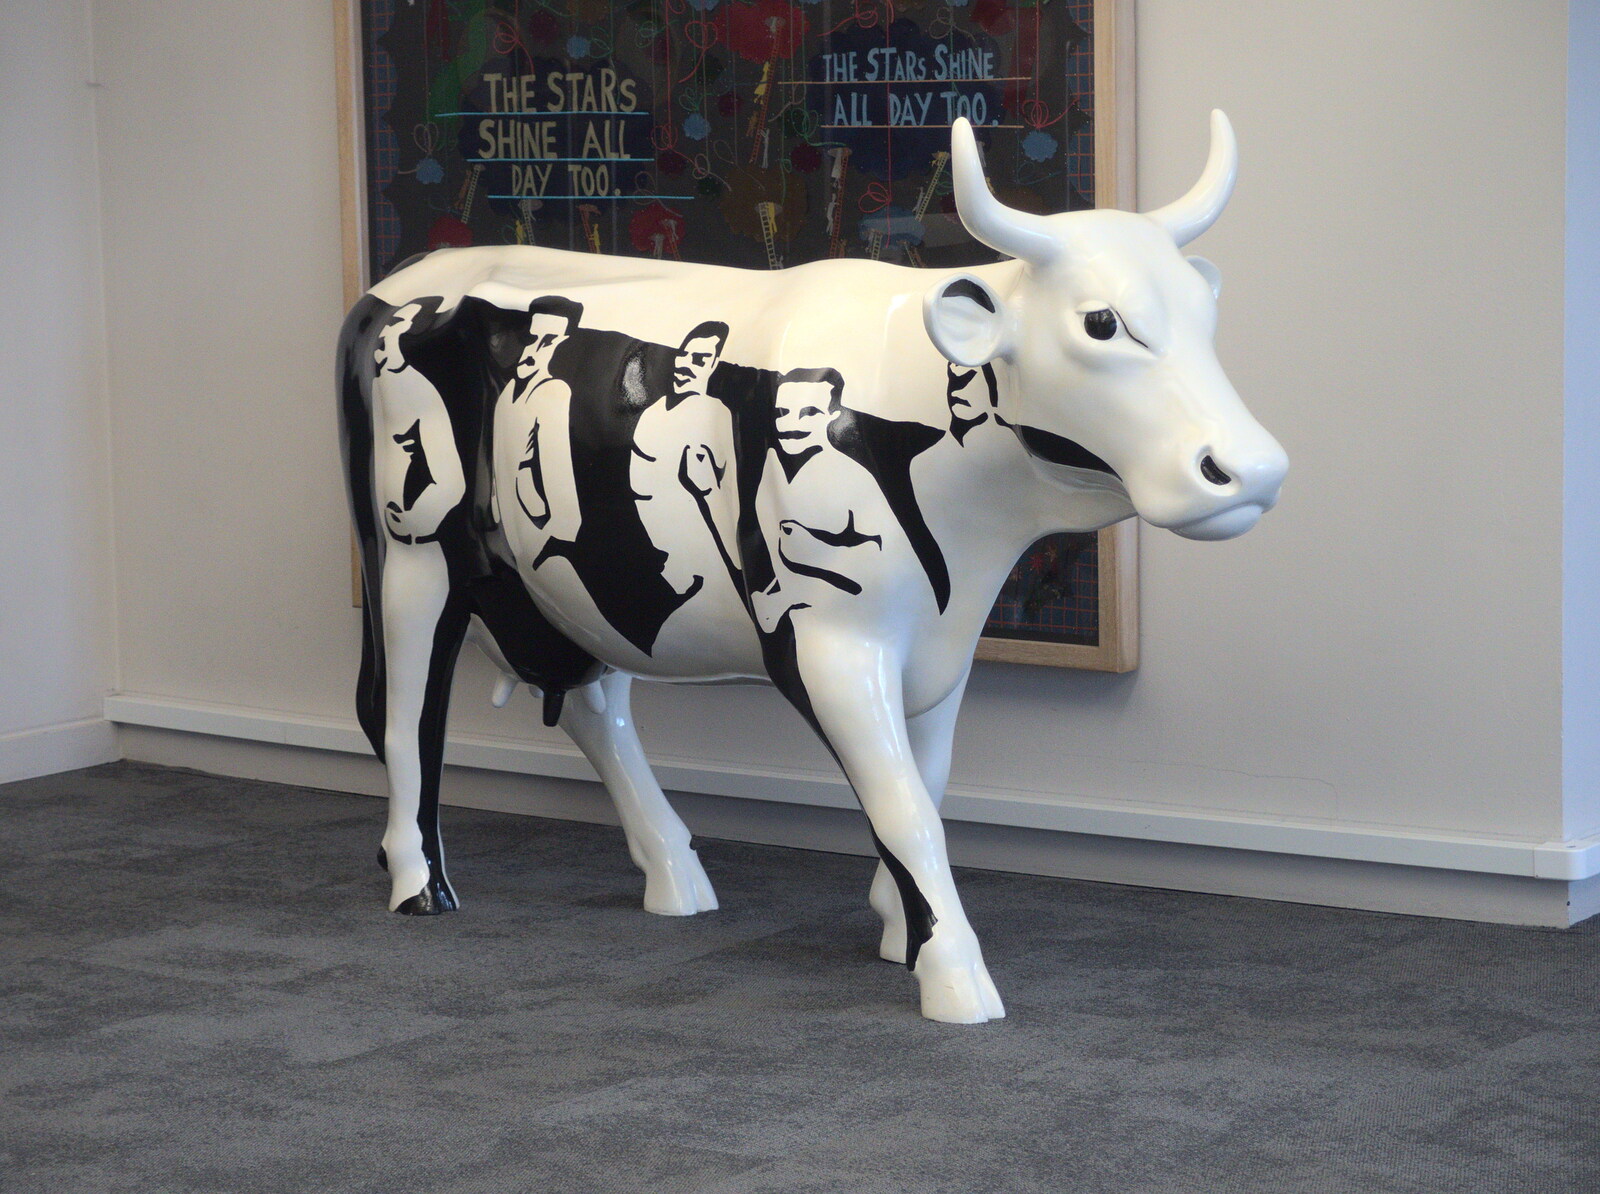 A curious cow from Droidcon 2016, Islington, London - 27th October 2016